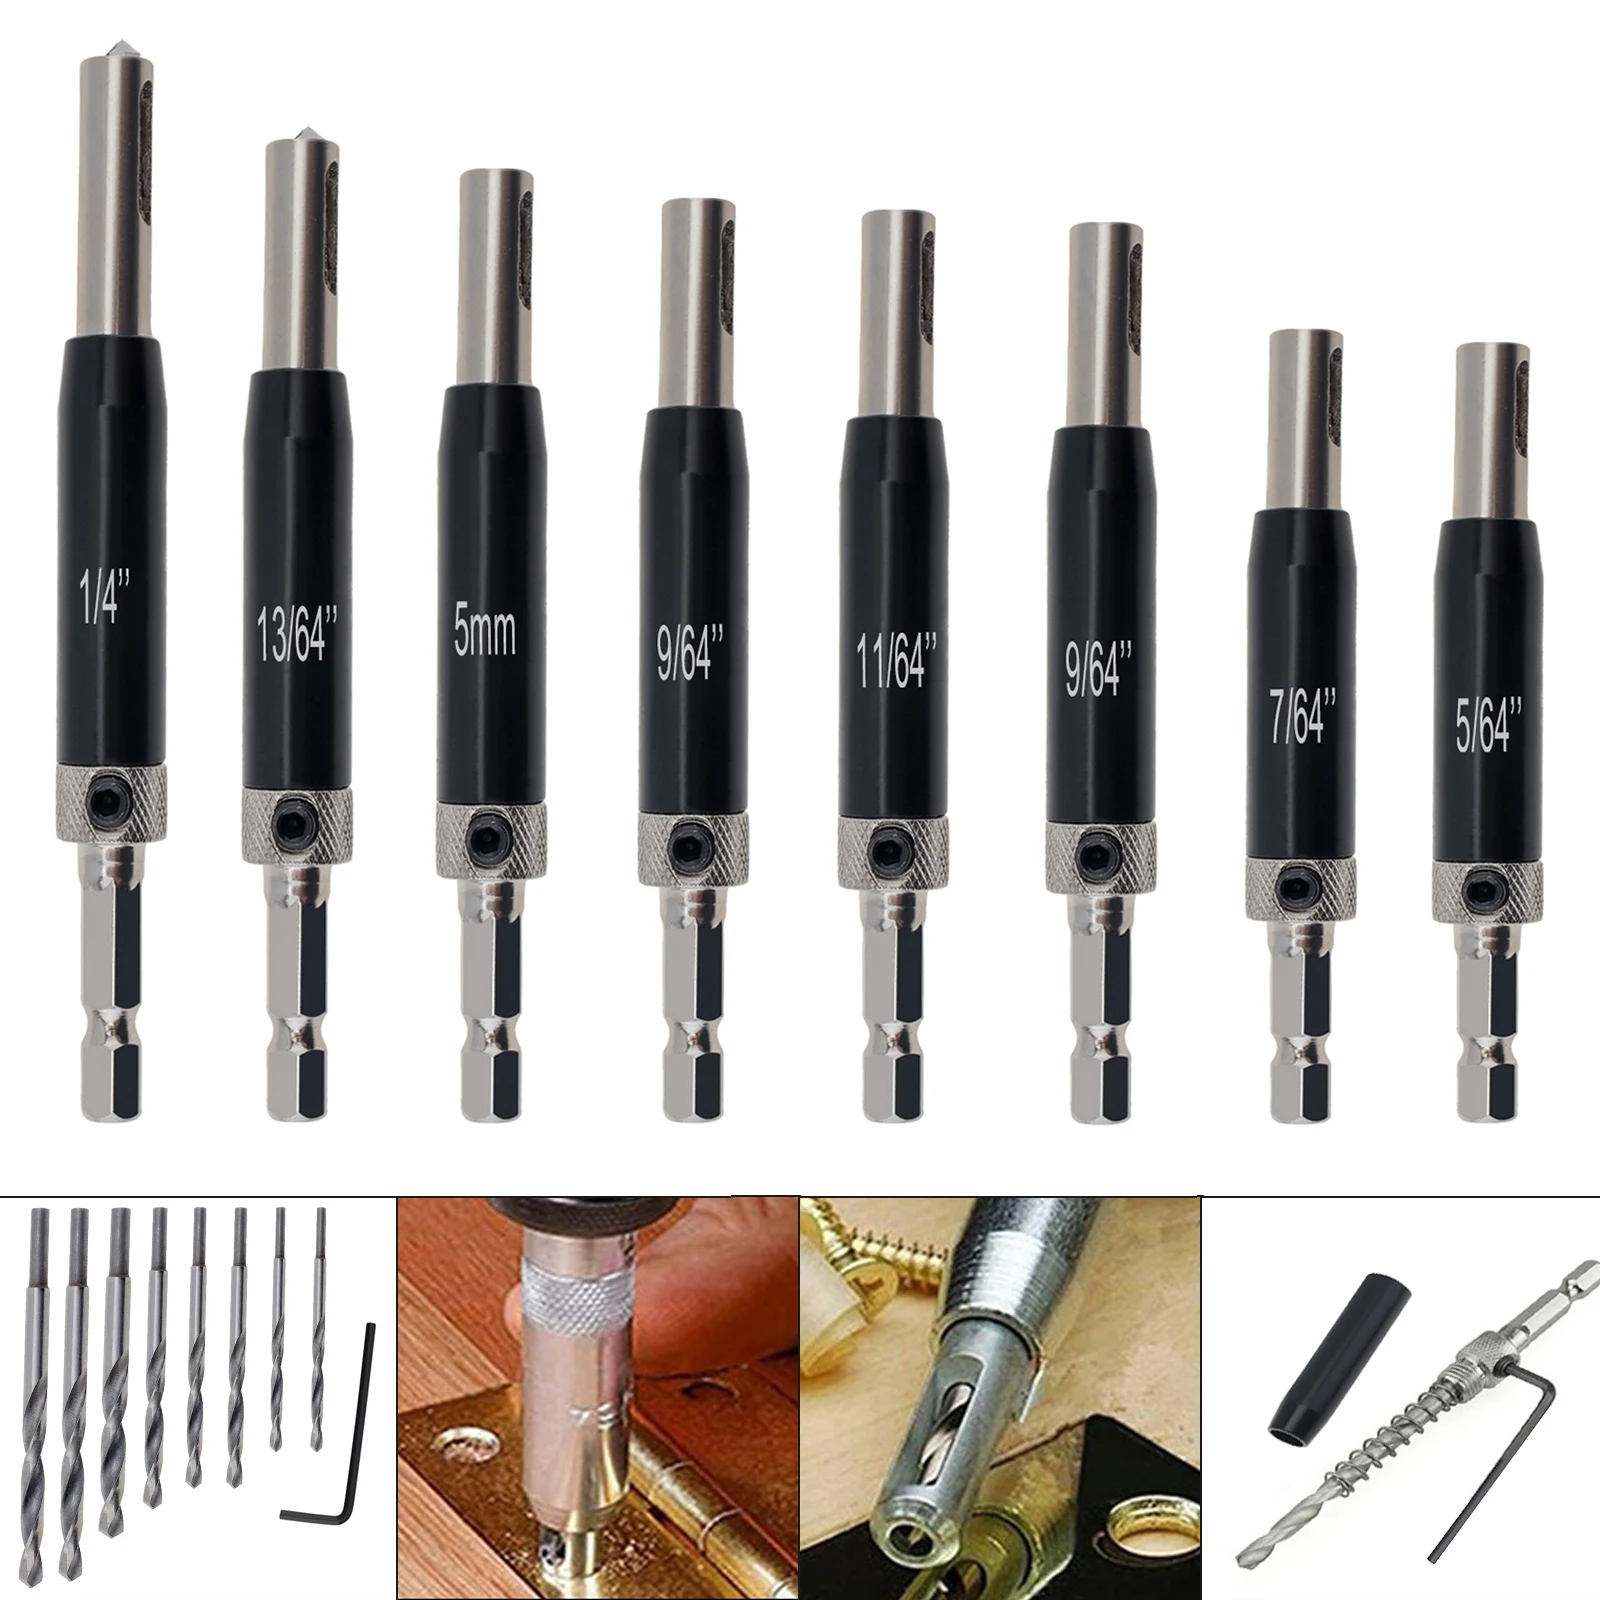 16Pcs Self Centering Drill Bits Set For Woodworking Tools Window Door Hinge With Hex Key Hexagonal Shank Hinge Drill Bit Tool door and window hinge opener woodworking drilling hexagonal drill positioning special shaped drilling set tool